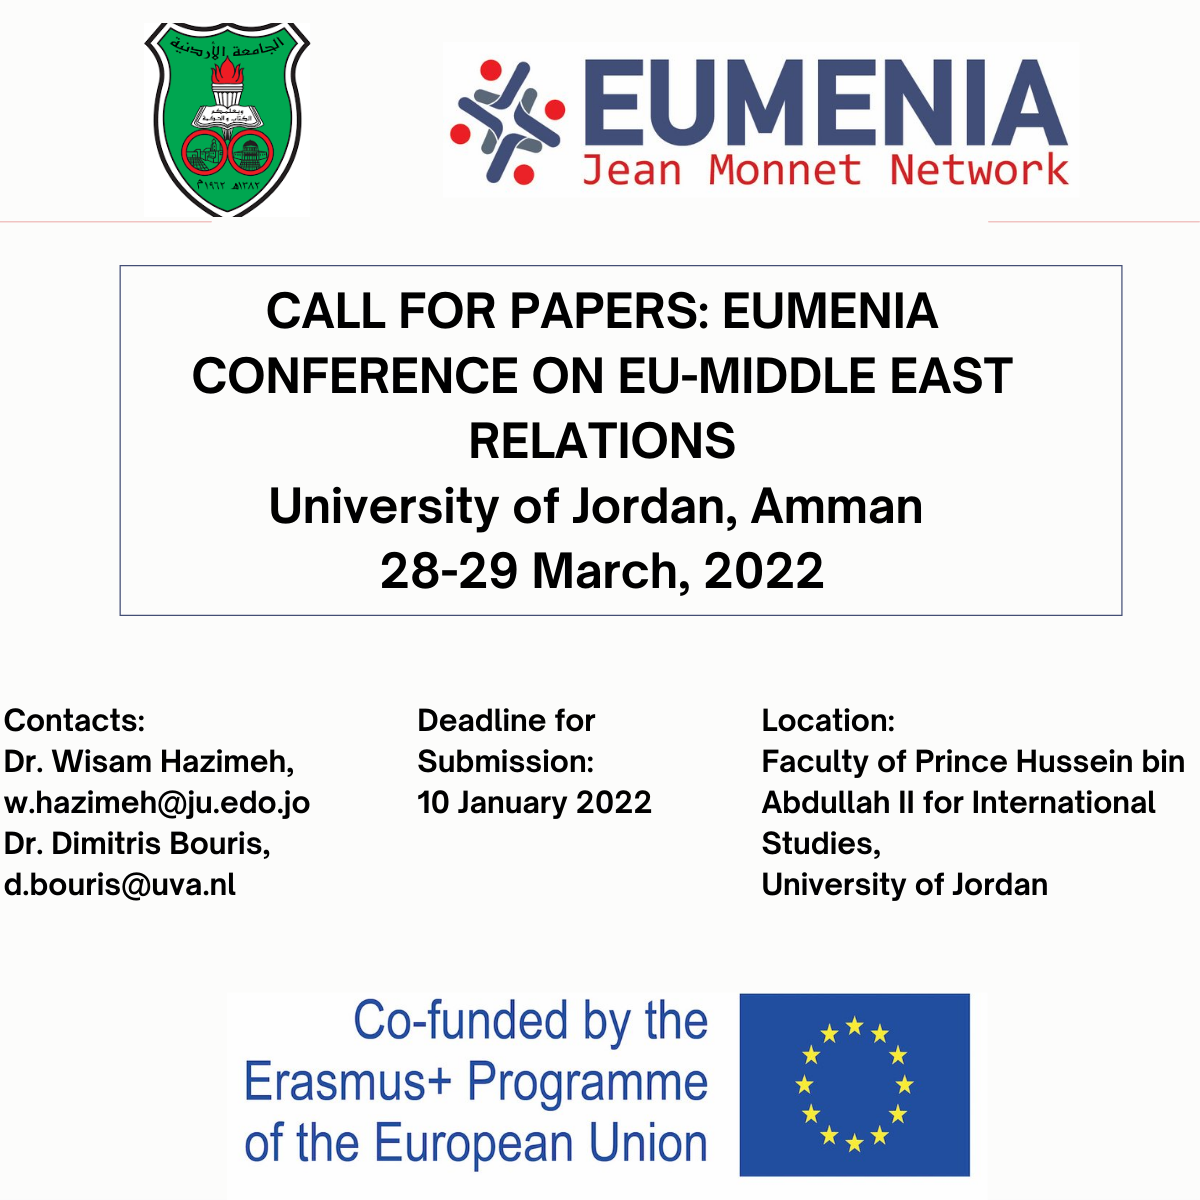 Call for Papers: EUMENIA Conference on EU-Middle East Relations, University of Jordan, Amman, 28-29 March 2022